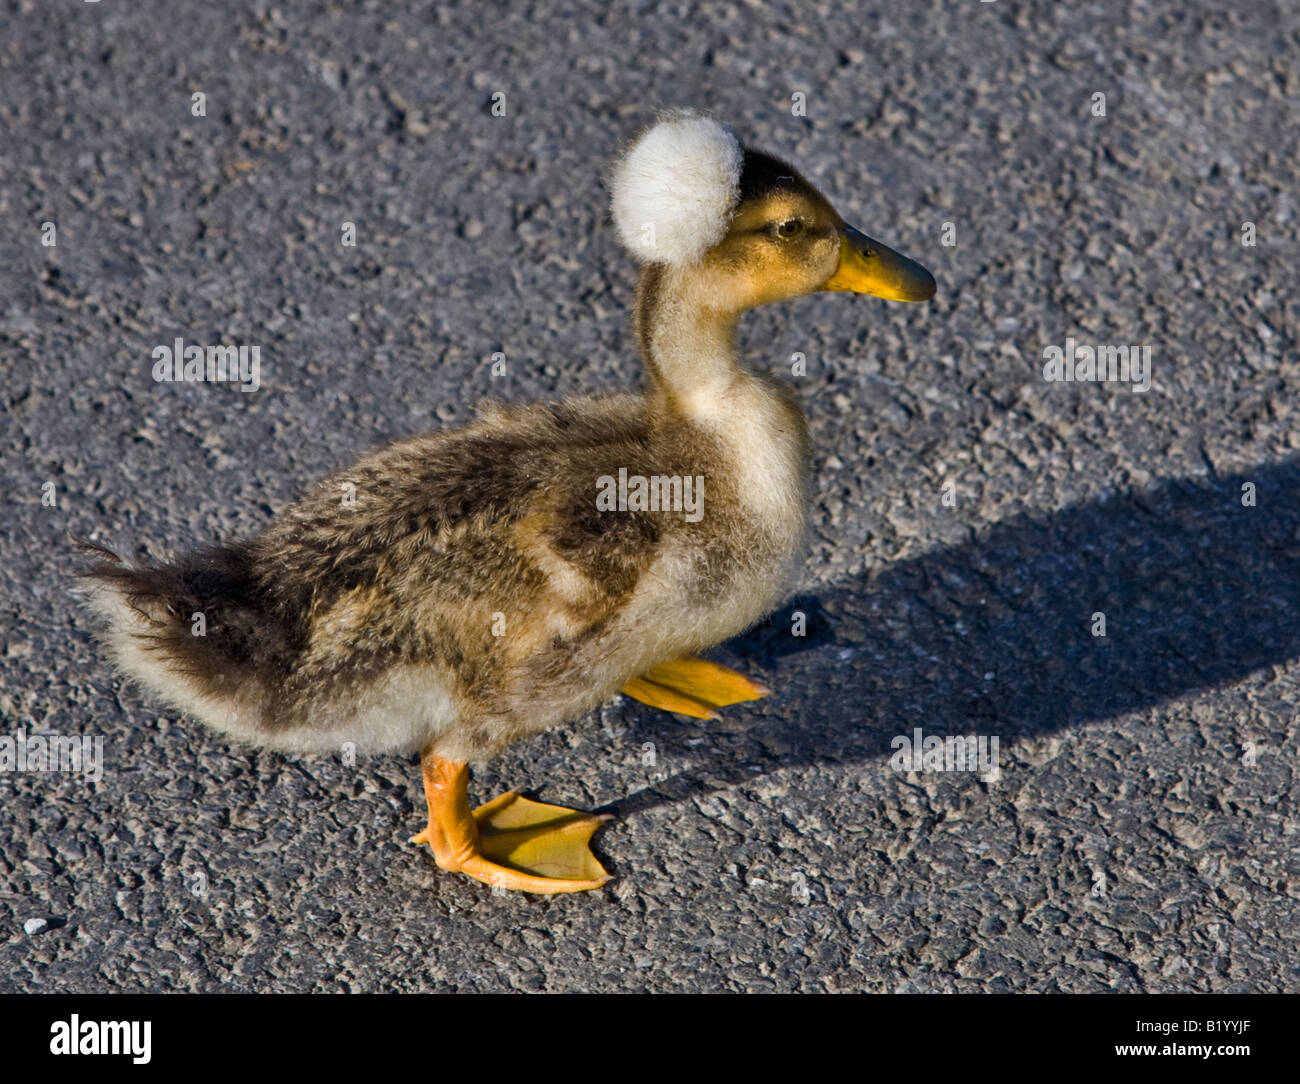 Crested Call Duckling Stock Photo